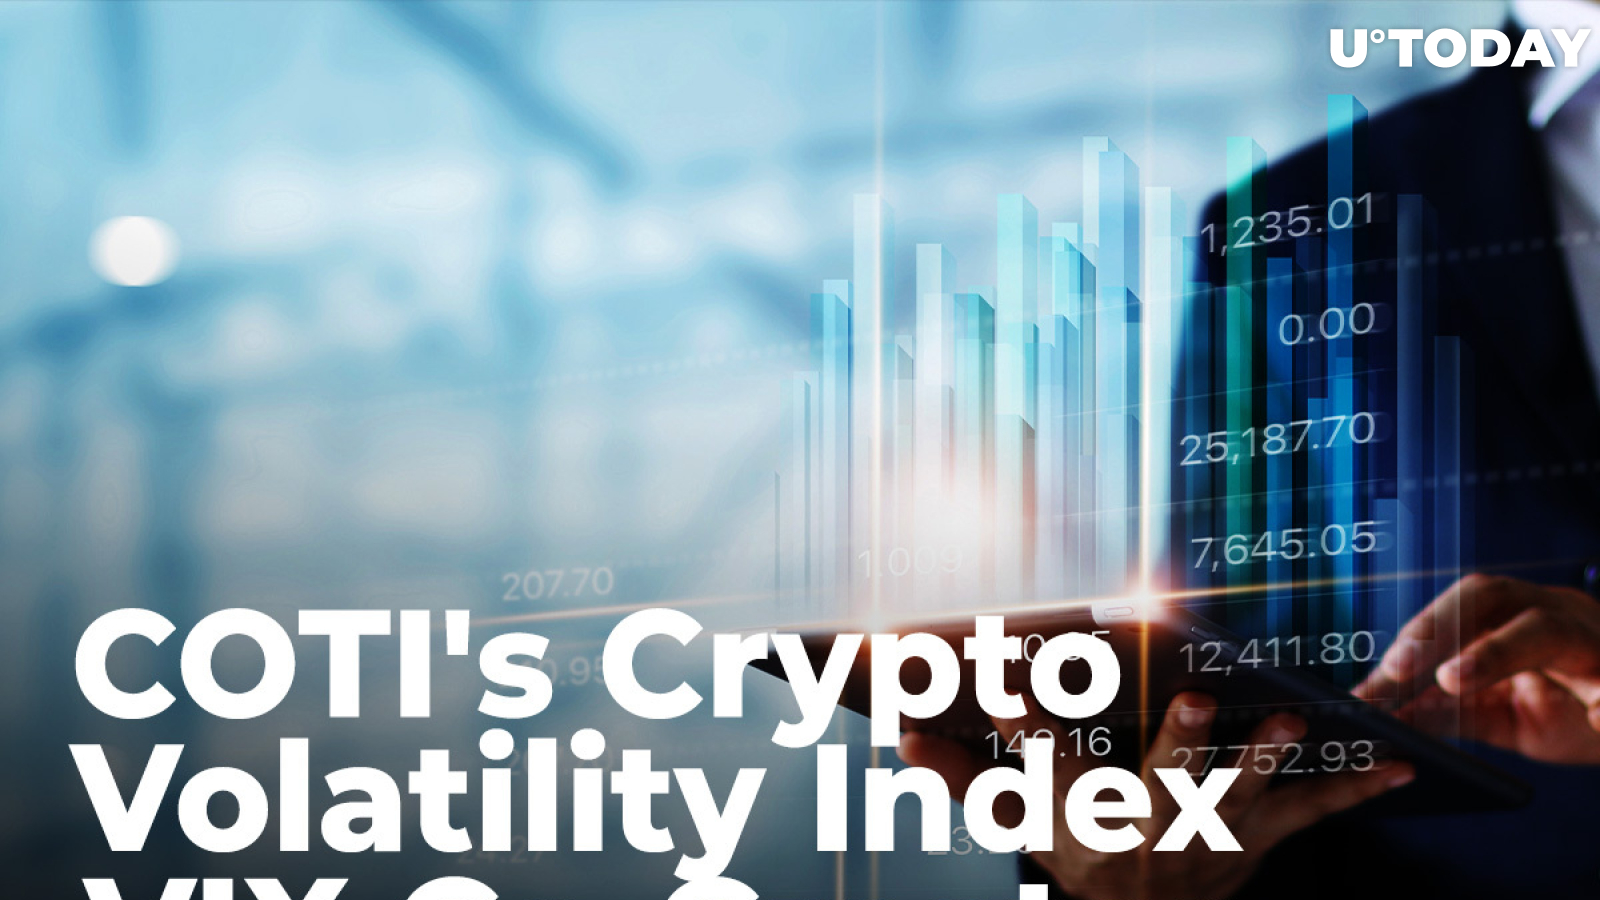 COTI's Crypto Volatility Index Board of Advisors Joined by VIX Co-Creator